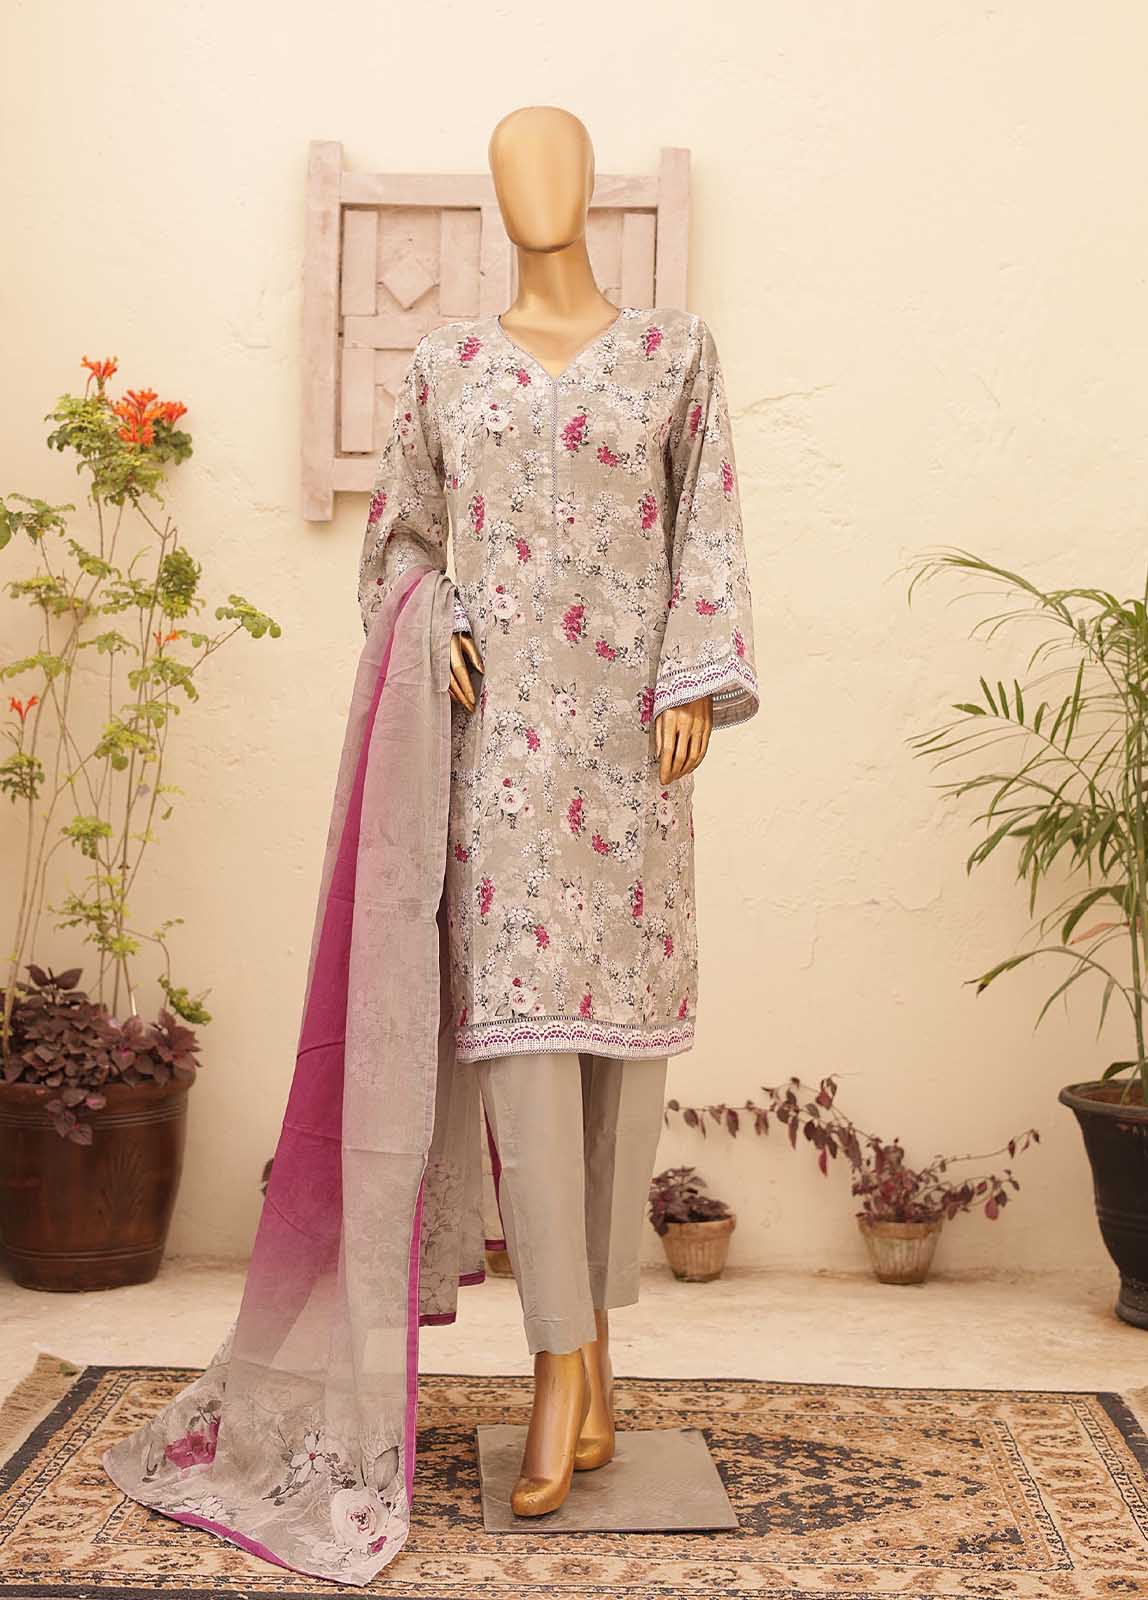 SMPR-0168- 3 Piece Printed Stitched Suit